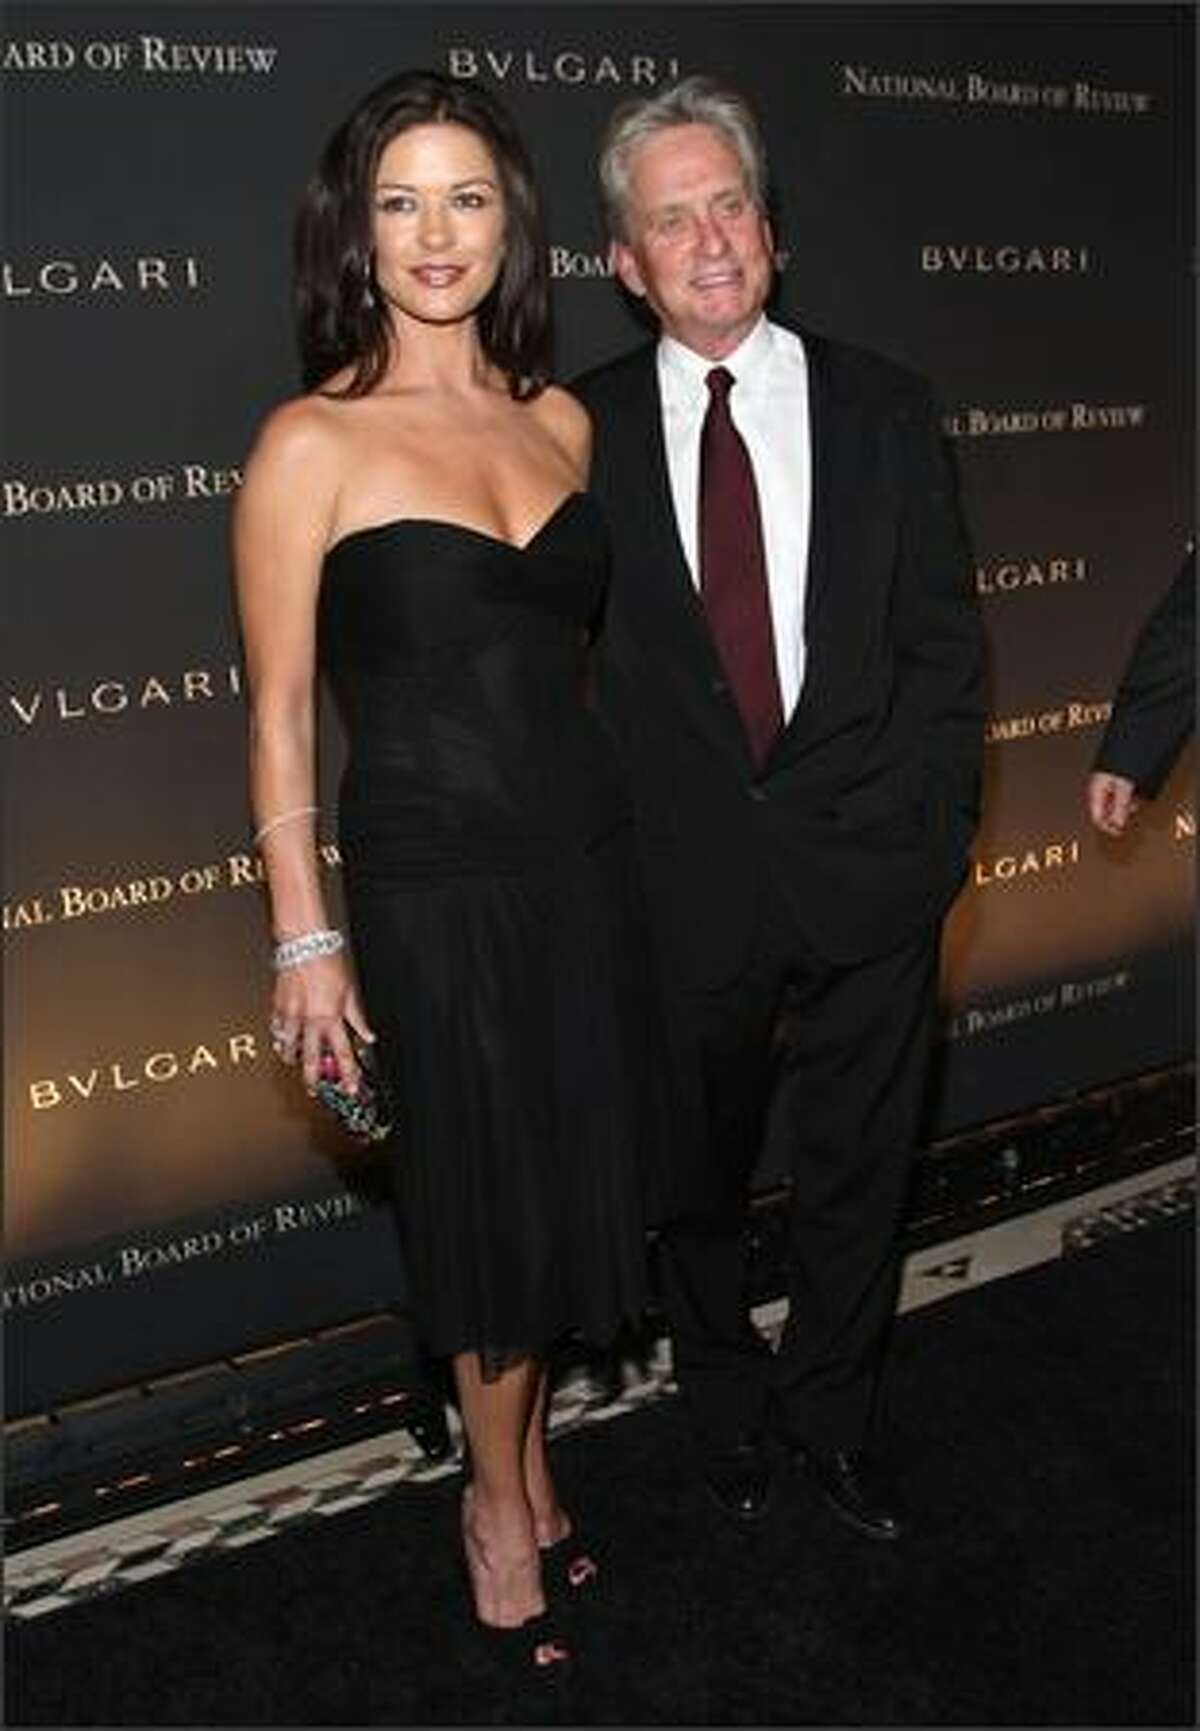 Husband-and-wife actors Catherine Zeta Jones and Michael Douglas attend the 2007 National Board of Review Awards Gala at Cipriani 42nd Stree in New York.